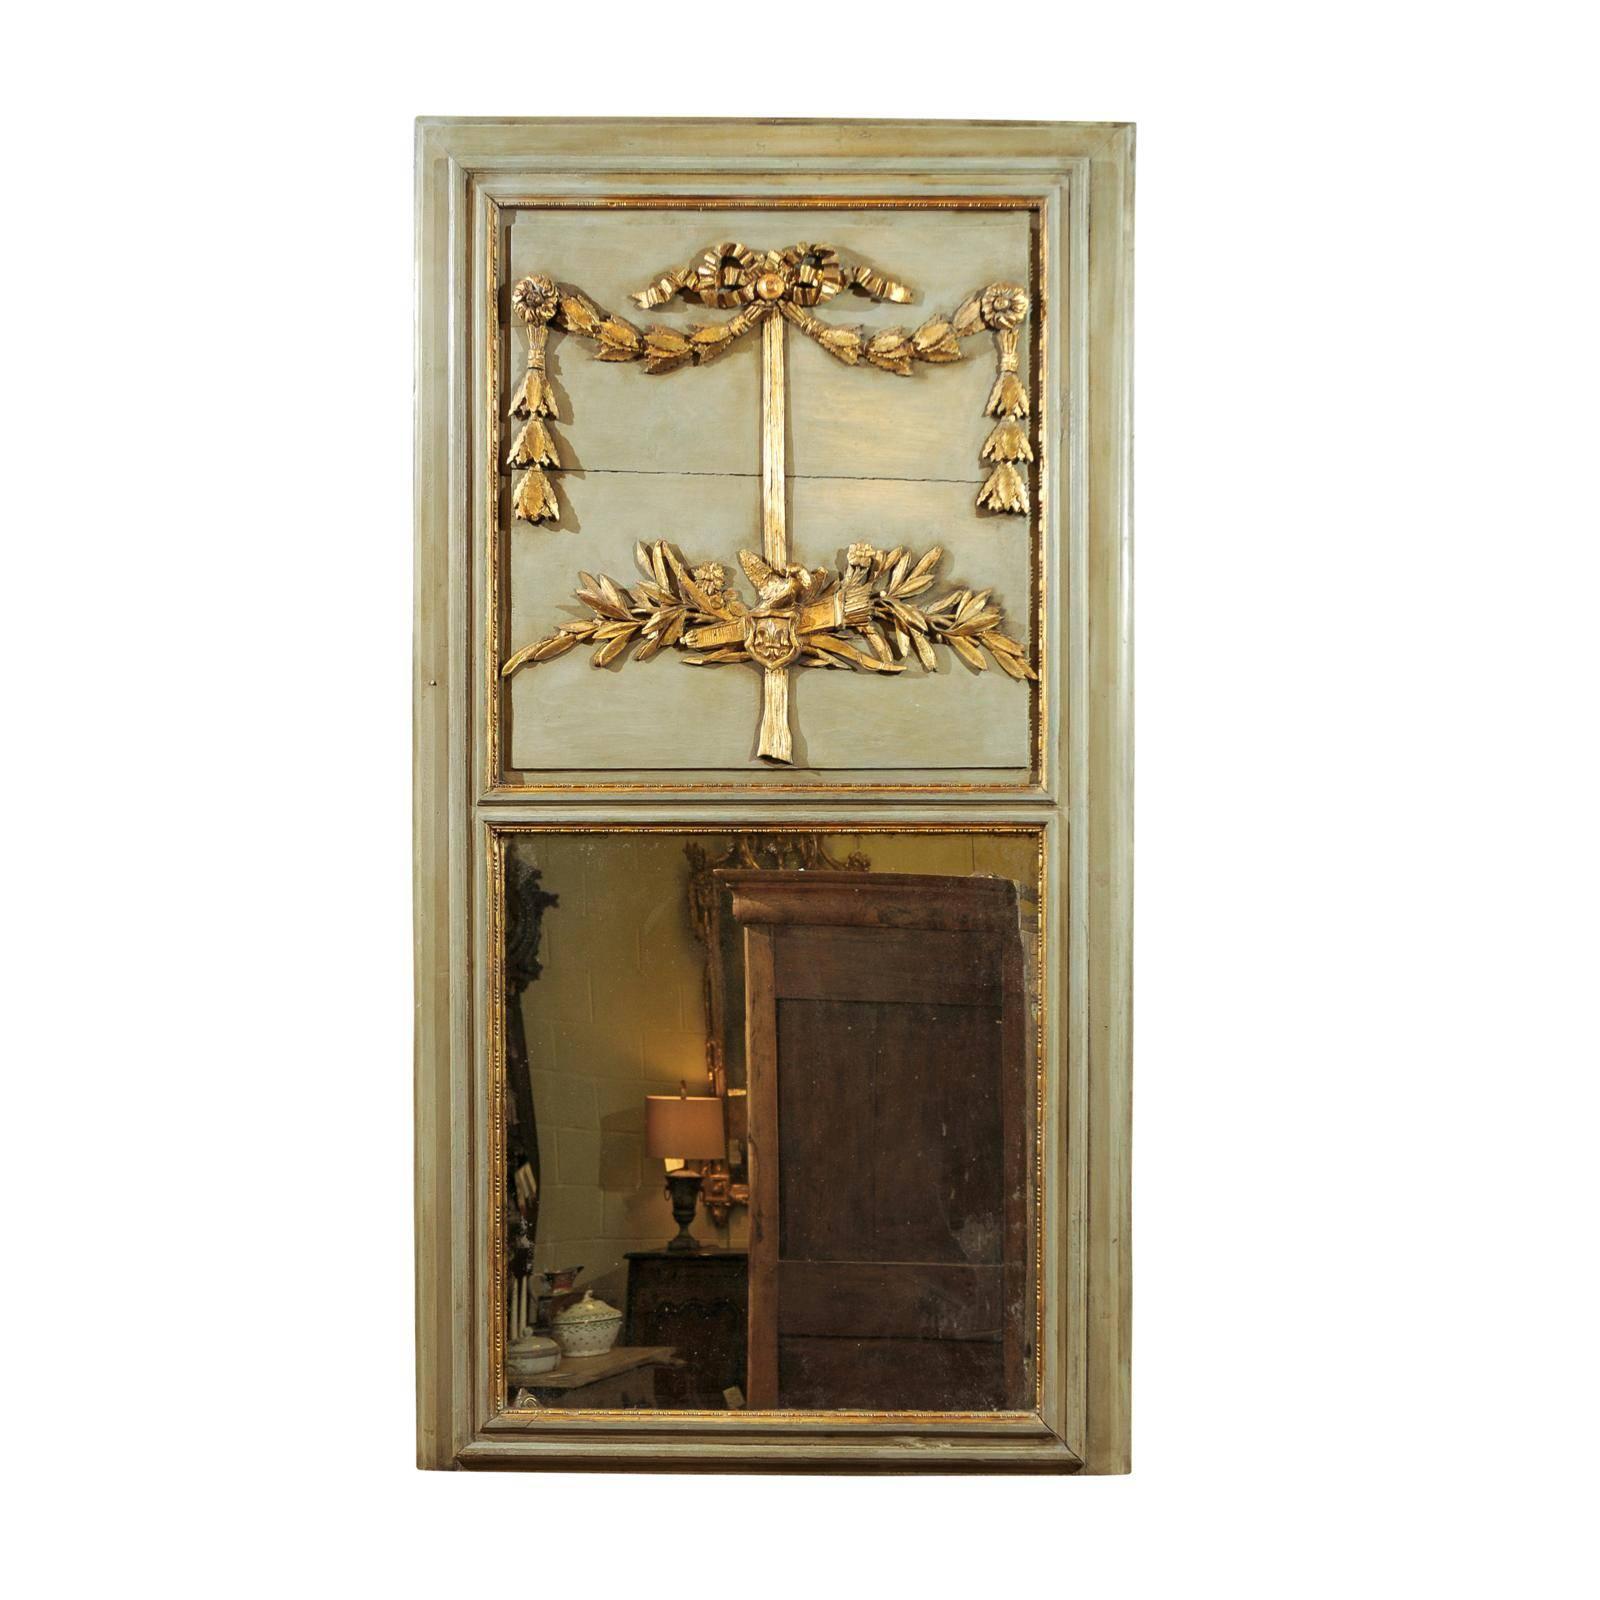 Louis XVI Style Green Painted Trumeau Mirror with Doves and Laurel Leaves